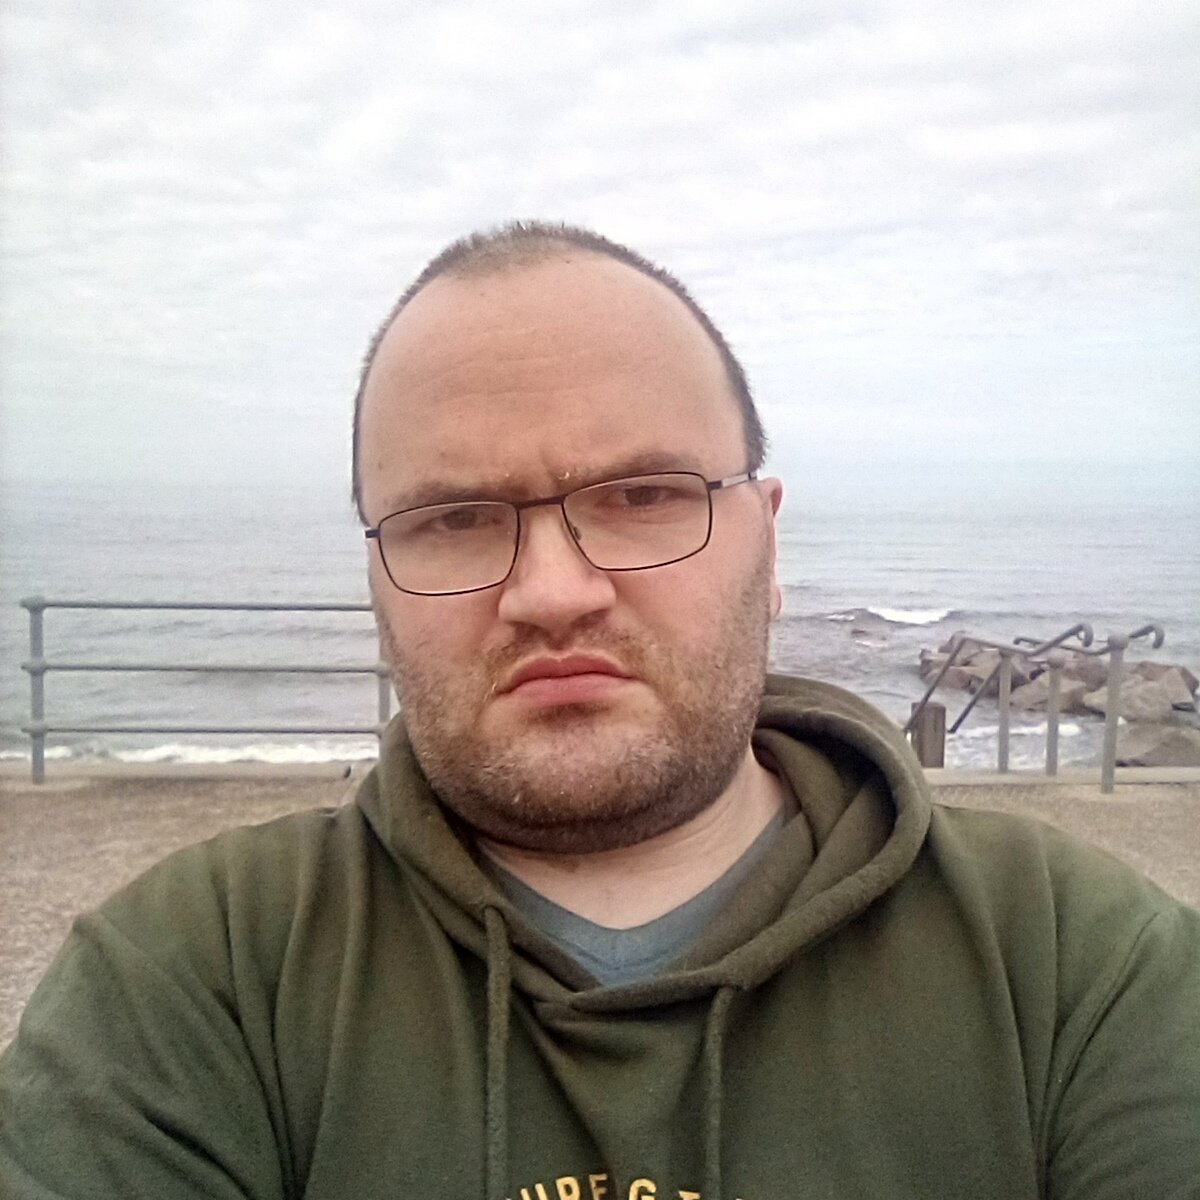 #NewProfilePic

First outdoor selfie of the year. Taken on Cleveleys Promenade.